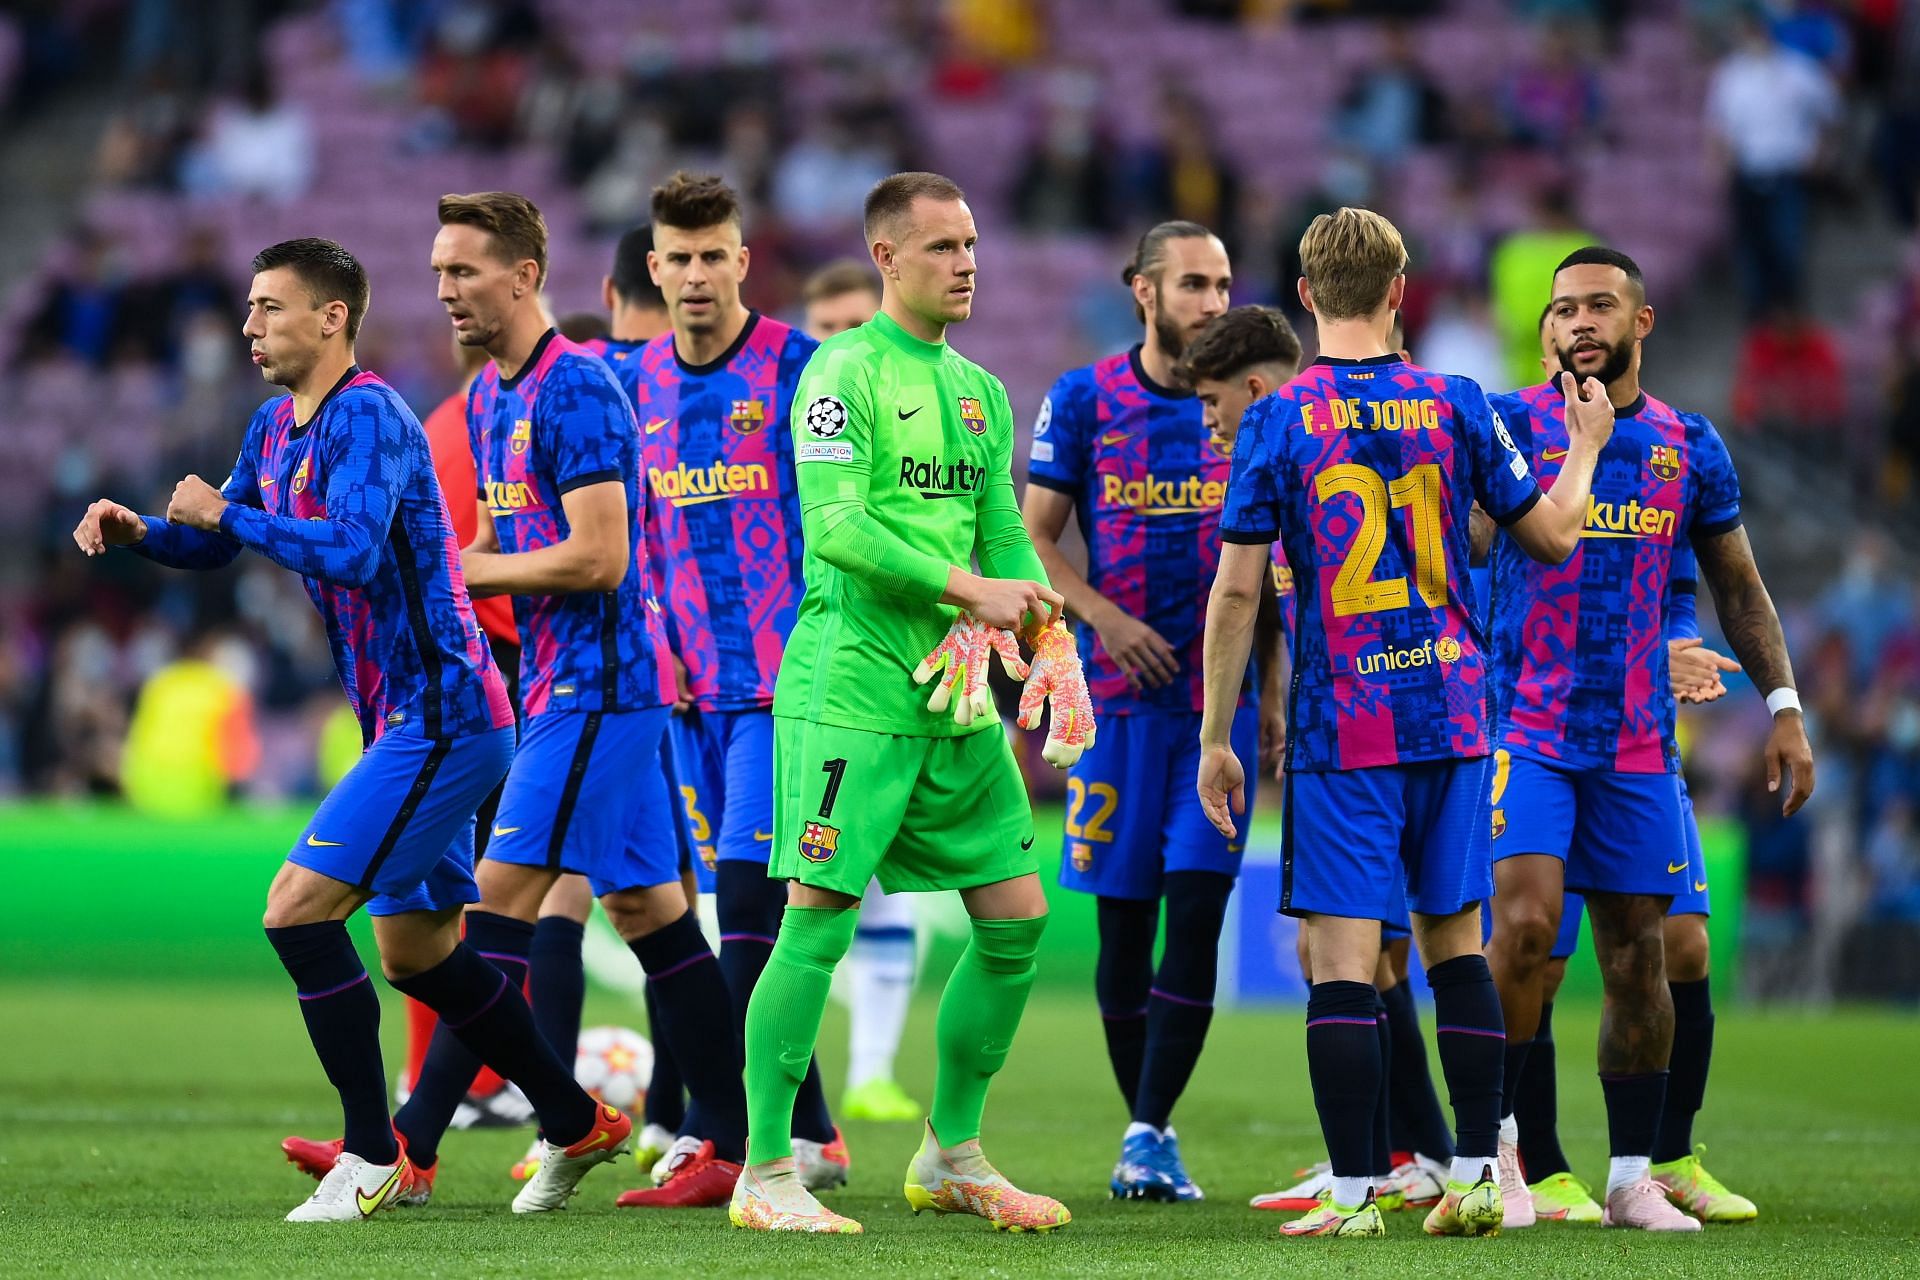 Barcelona earned an important victory against Dynamo Kyiv last time out